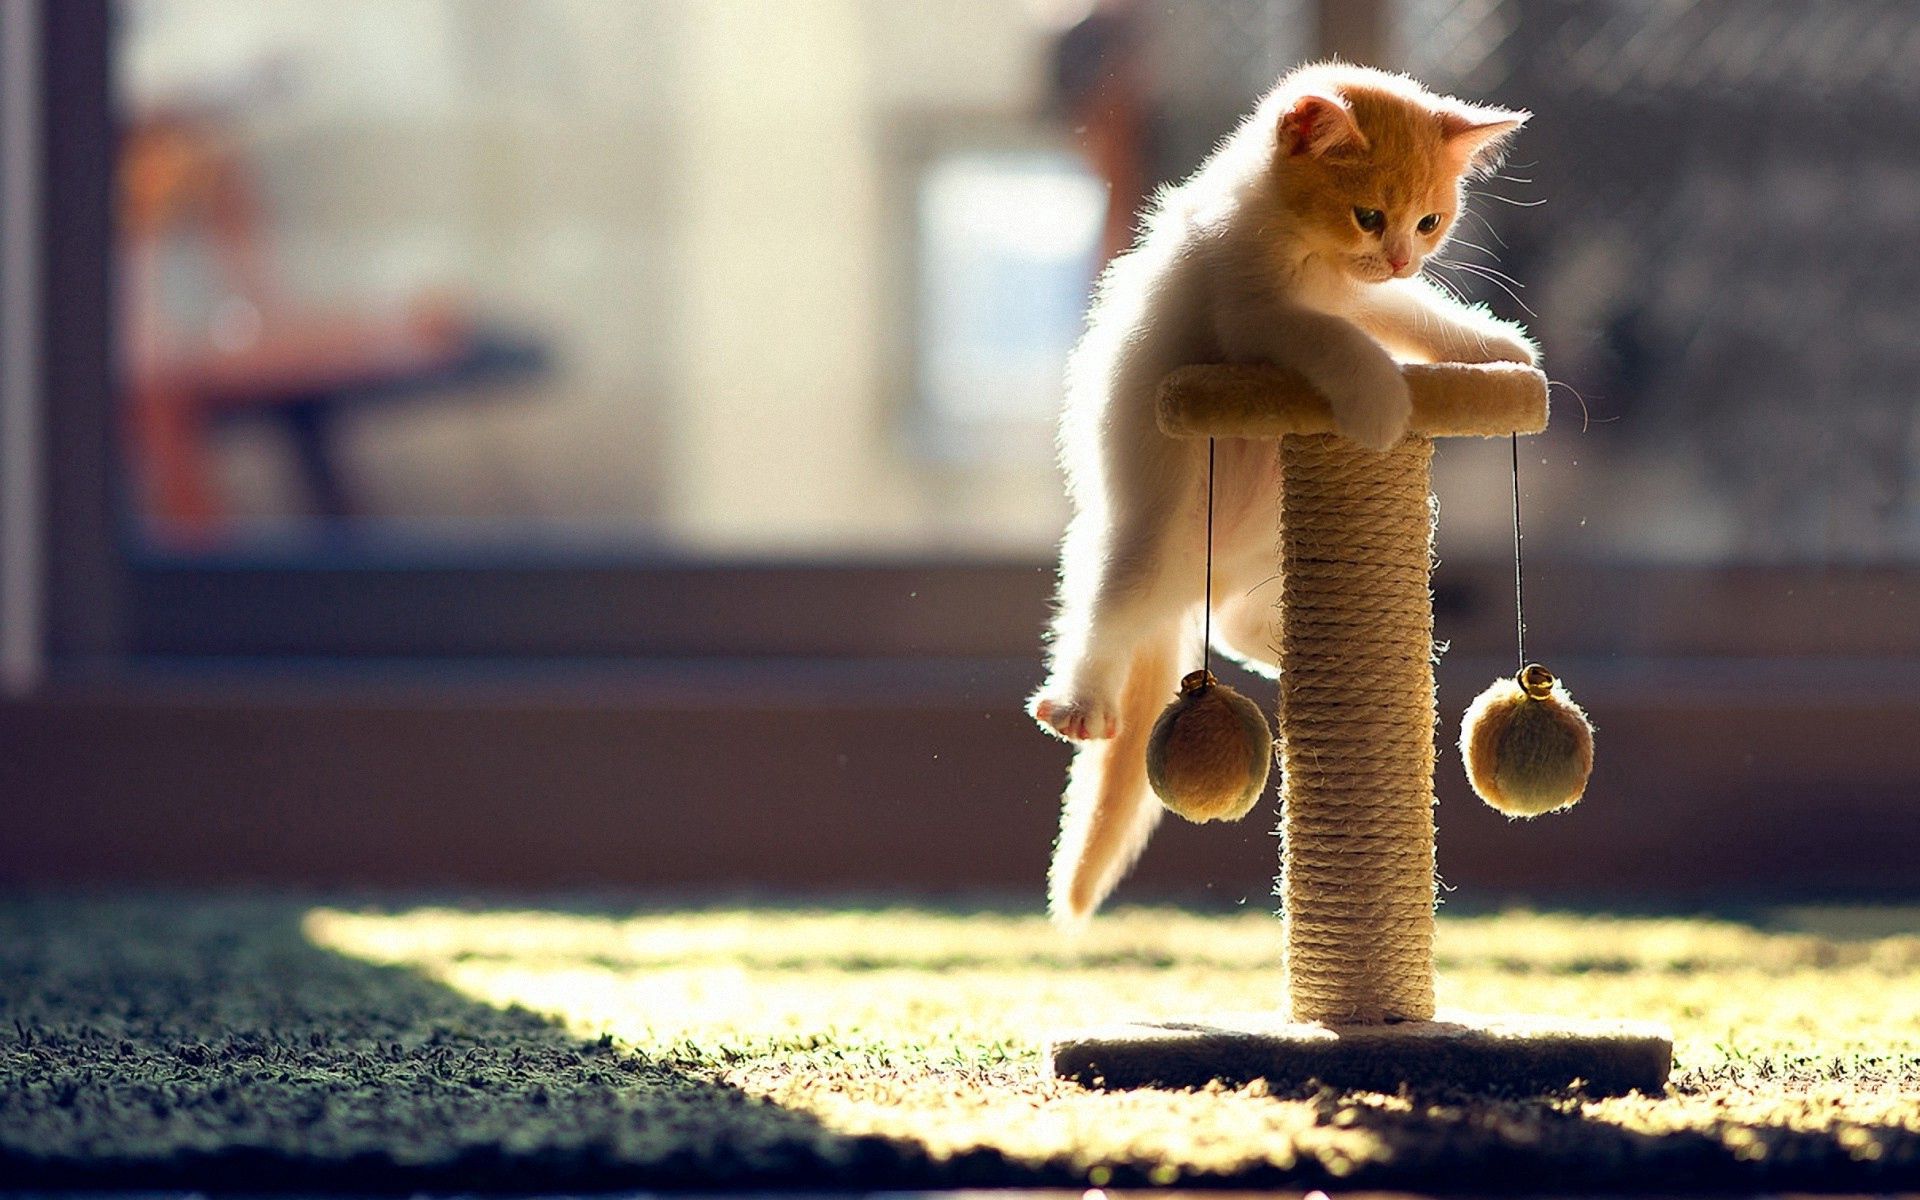 99831 download wallpaper animals, cat, kitty, kitten, playful, climb screensavers and pictures for free